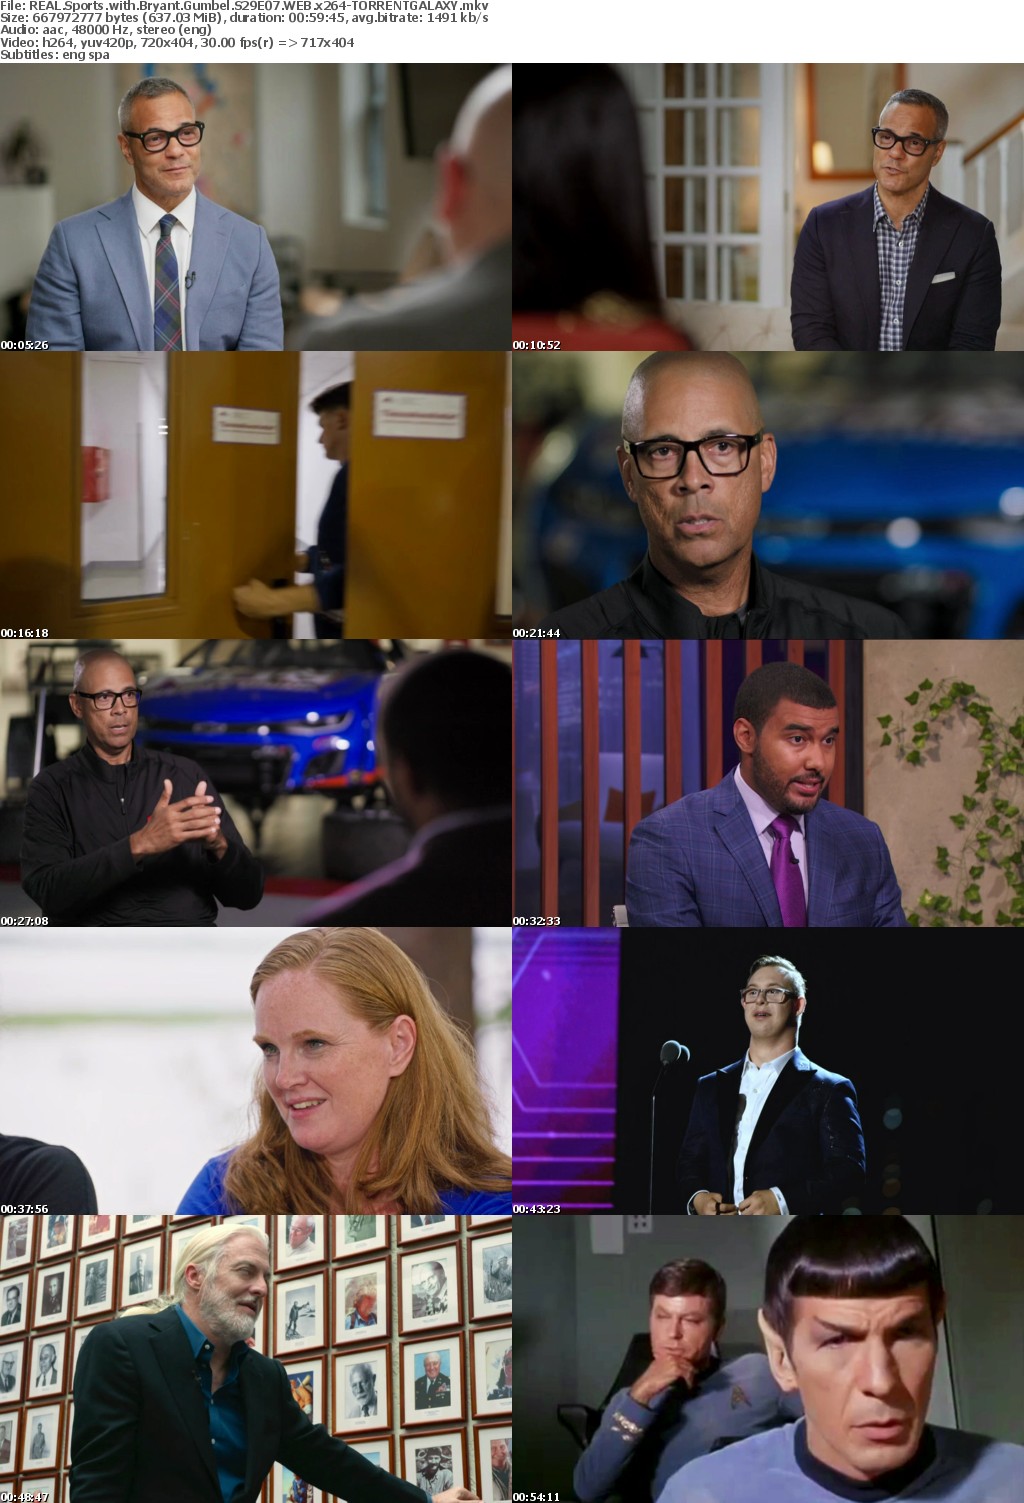 REAL Sports with Bryant Gumbel S29E07 WEB x264-GALAXY